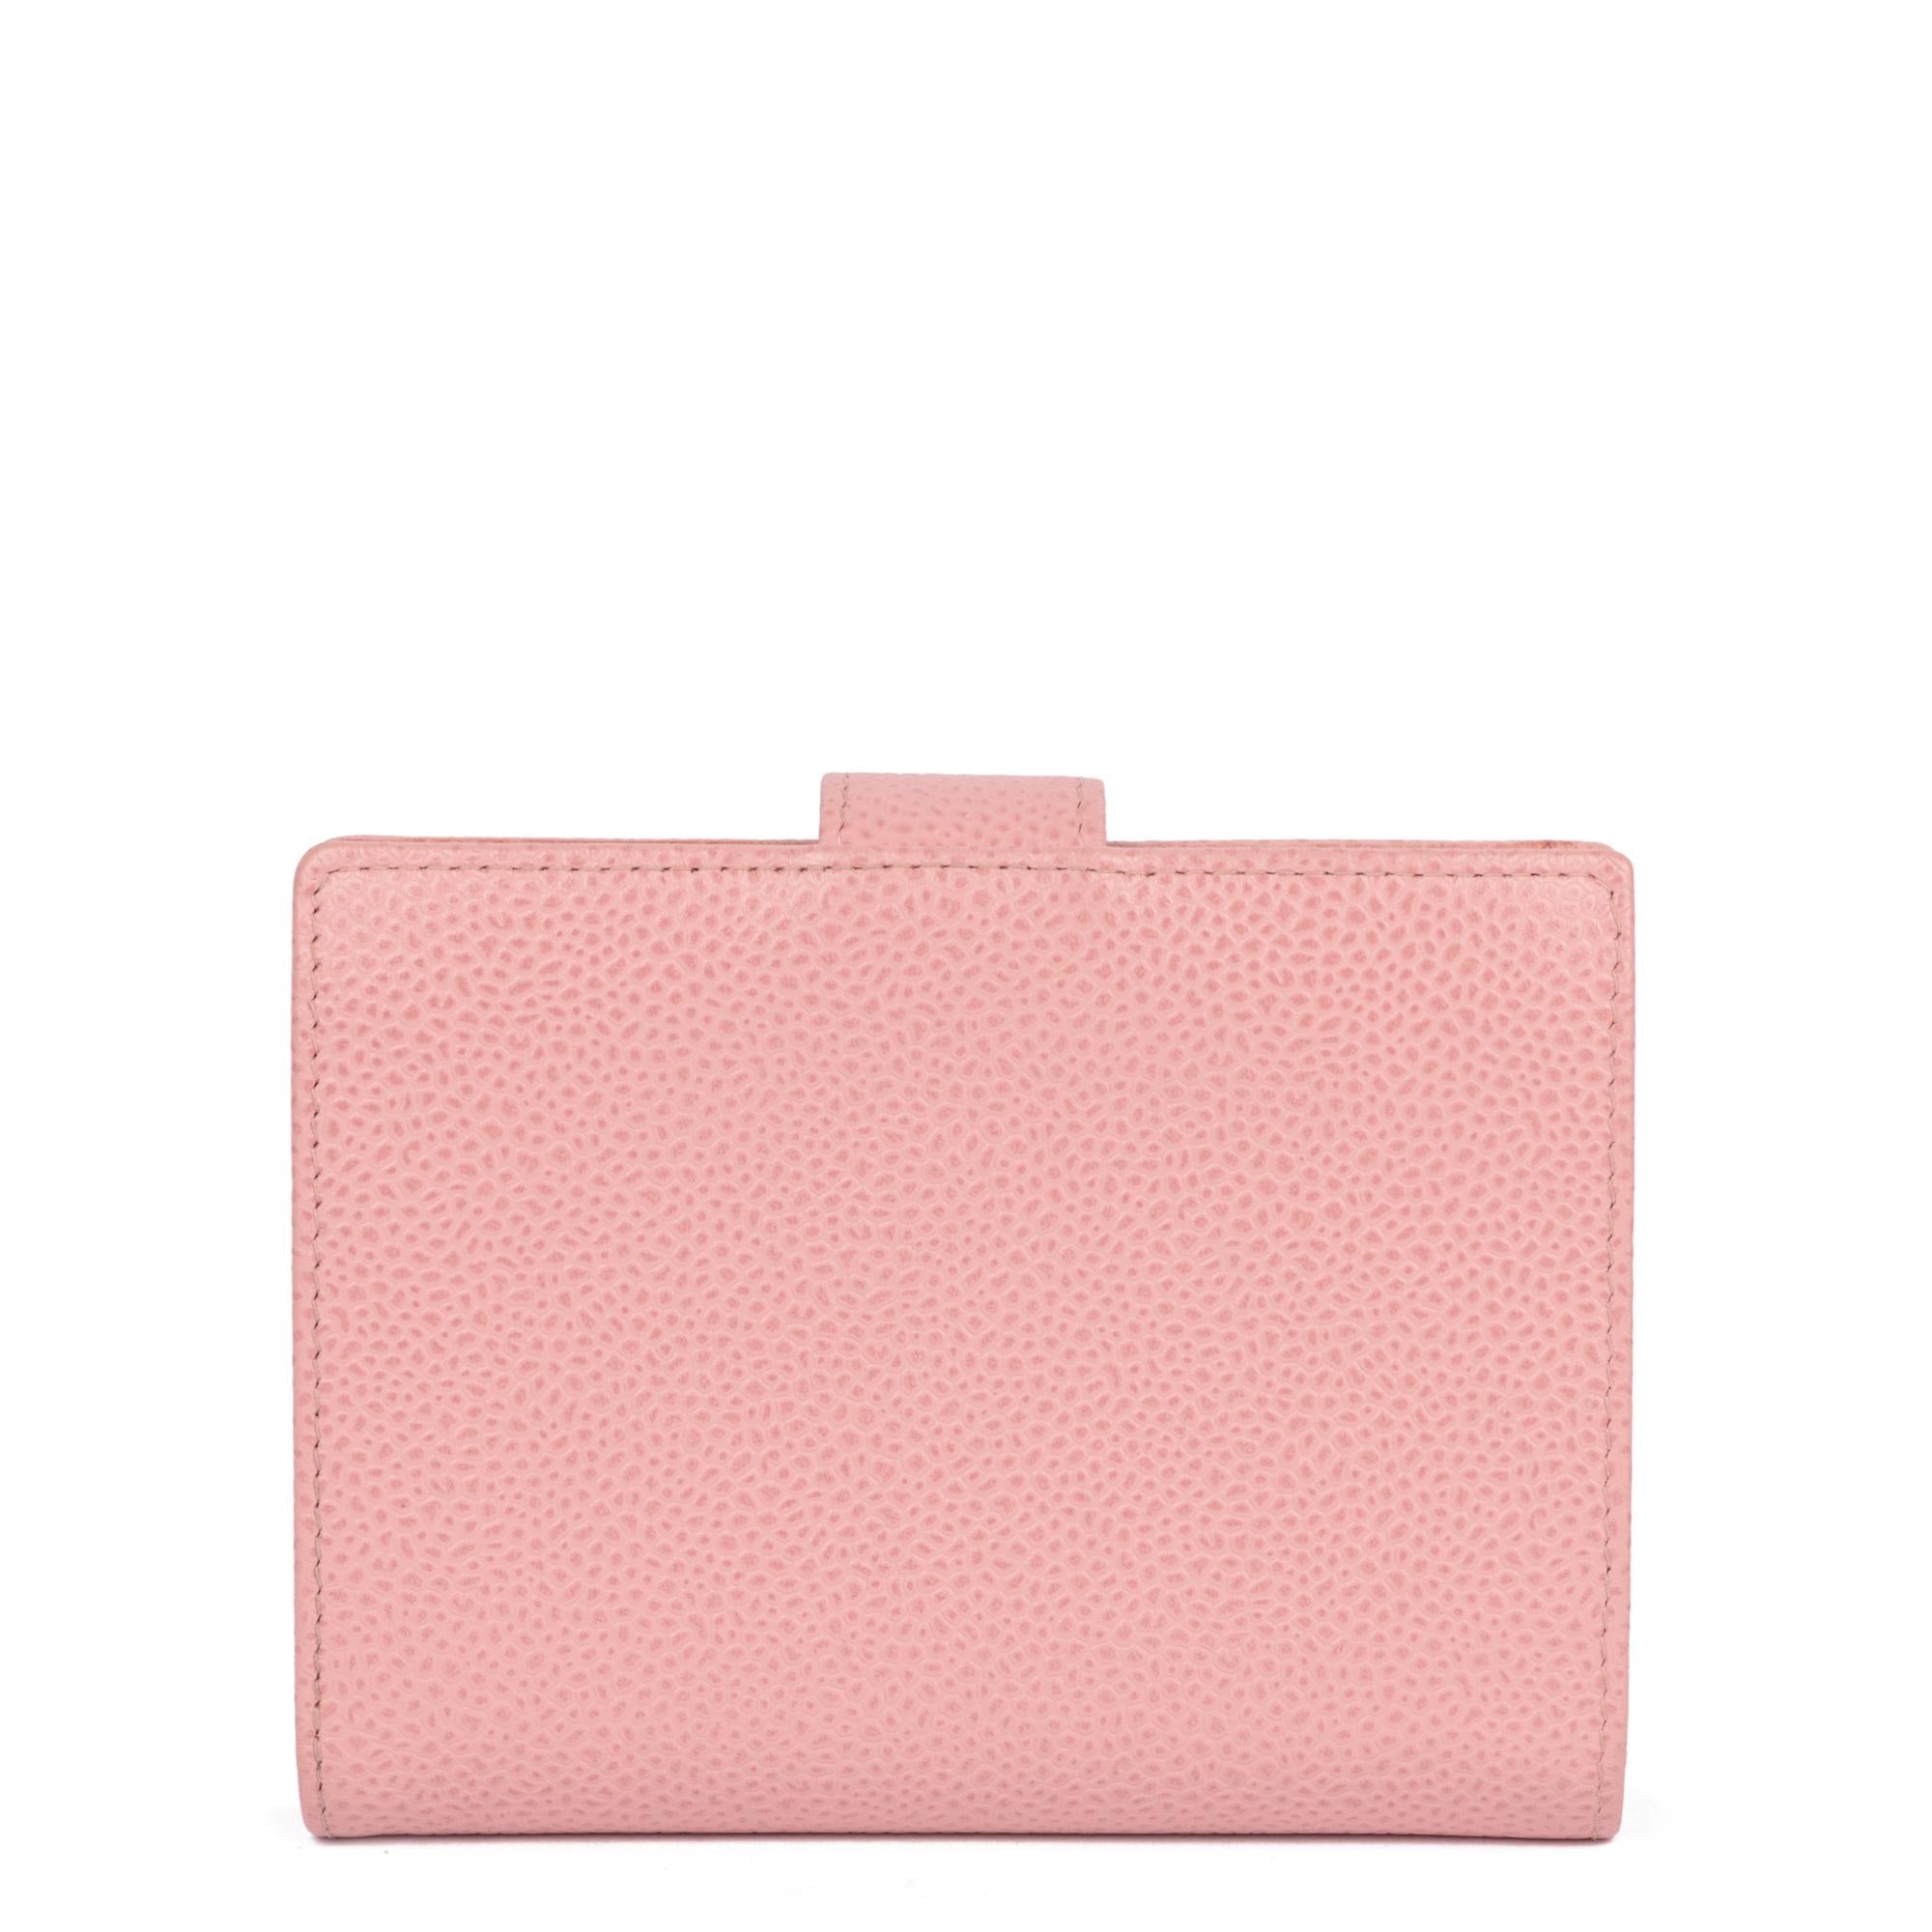 Chanel Pink Caviar Lambskin Leather Timeless Compact Wallet

CONDITION NOTES
The exterior is in very good condition with minimal signs of use.
The interior is in exceptional condition with minimal signs of use.
The hardware is in very good condition